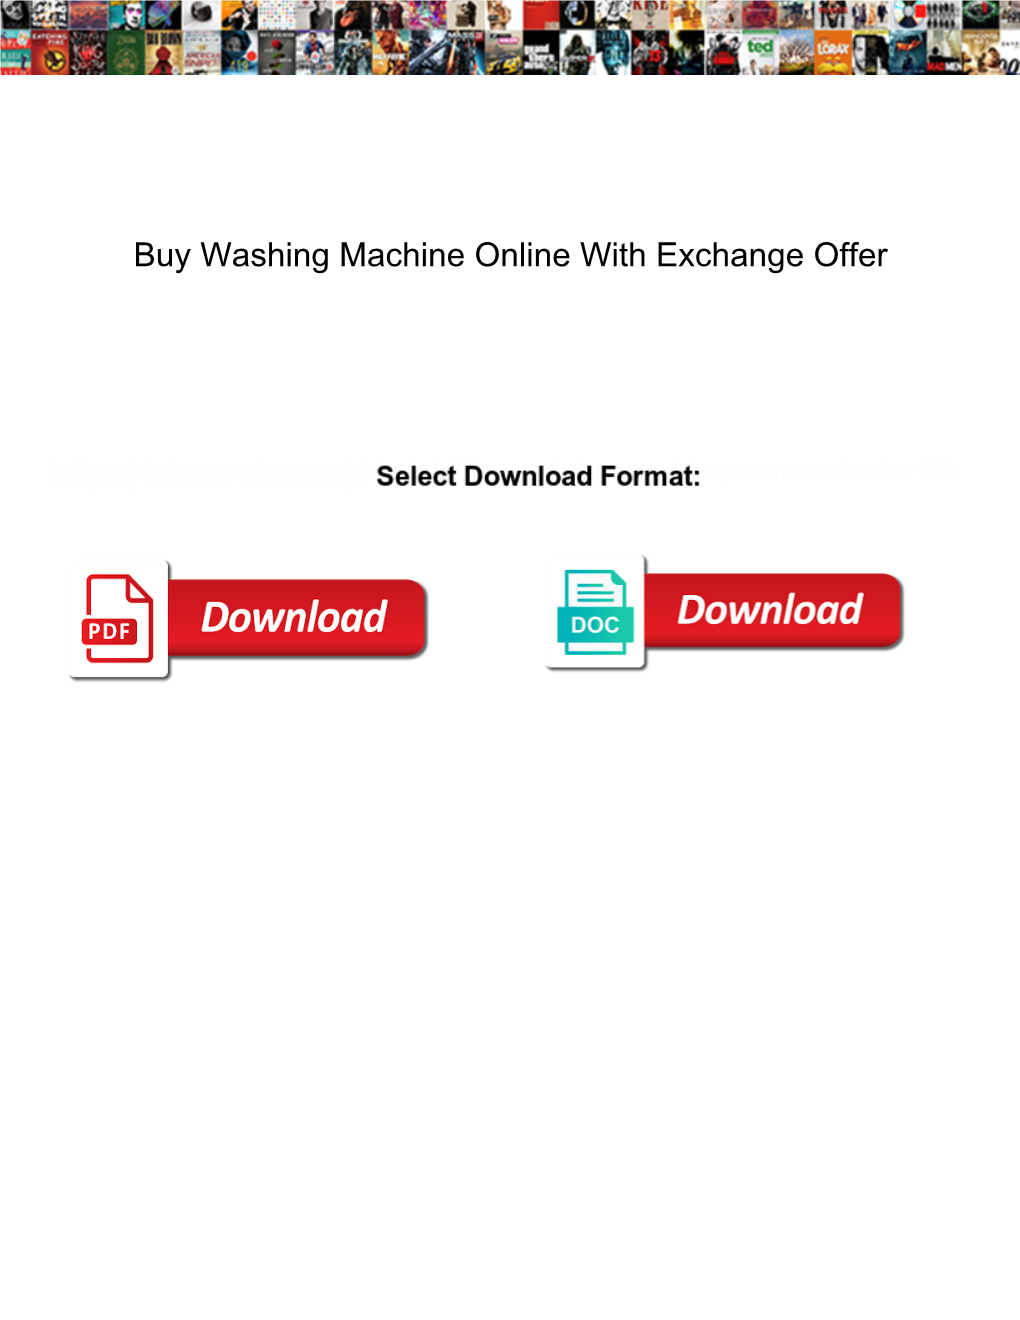 Buy Washing Machine Online with Exchange Offer